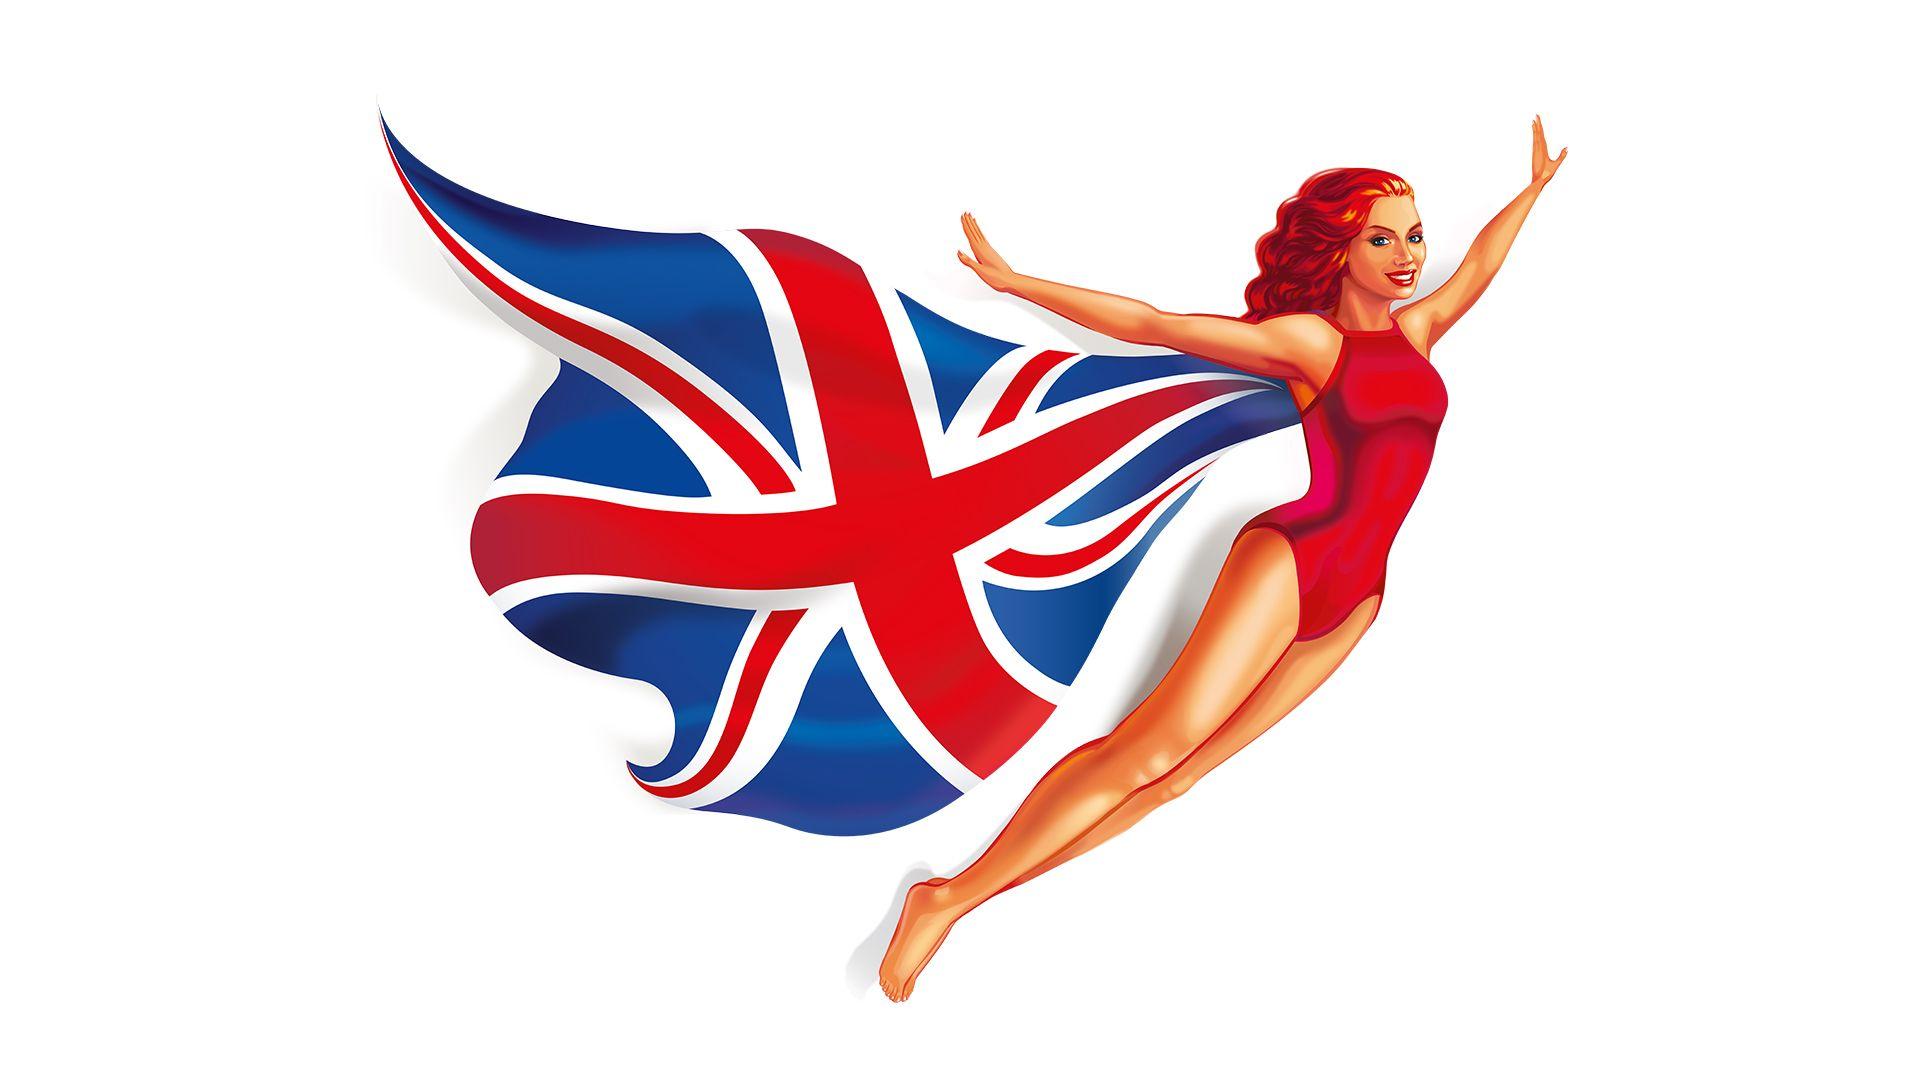 Flying Logo - Virgin Atlantic's Flying Lady logo dropped for diverse new look ...